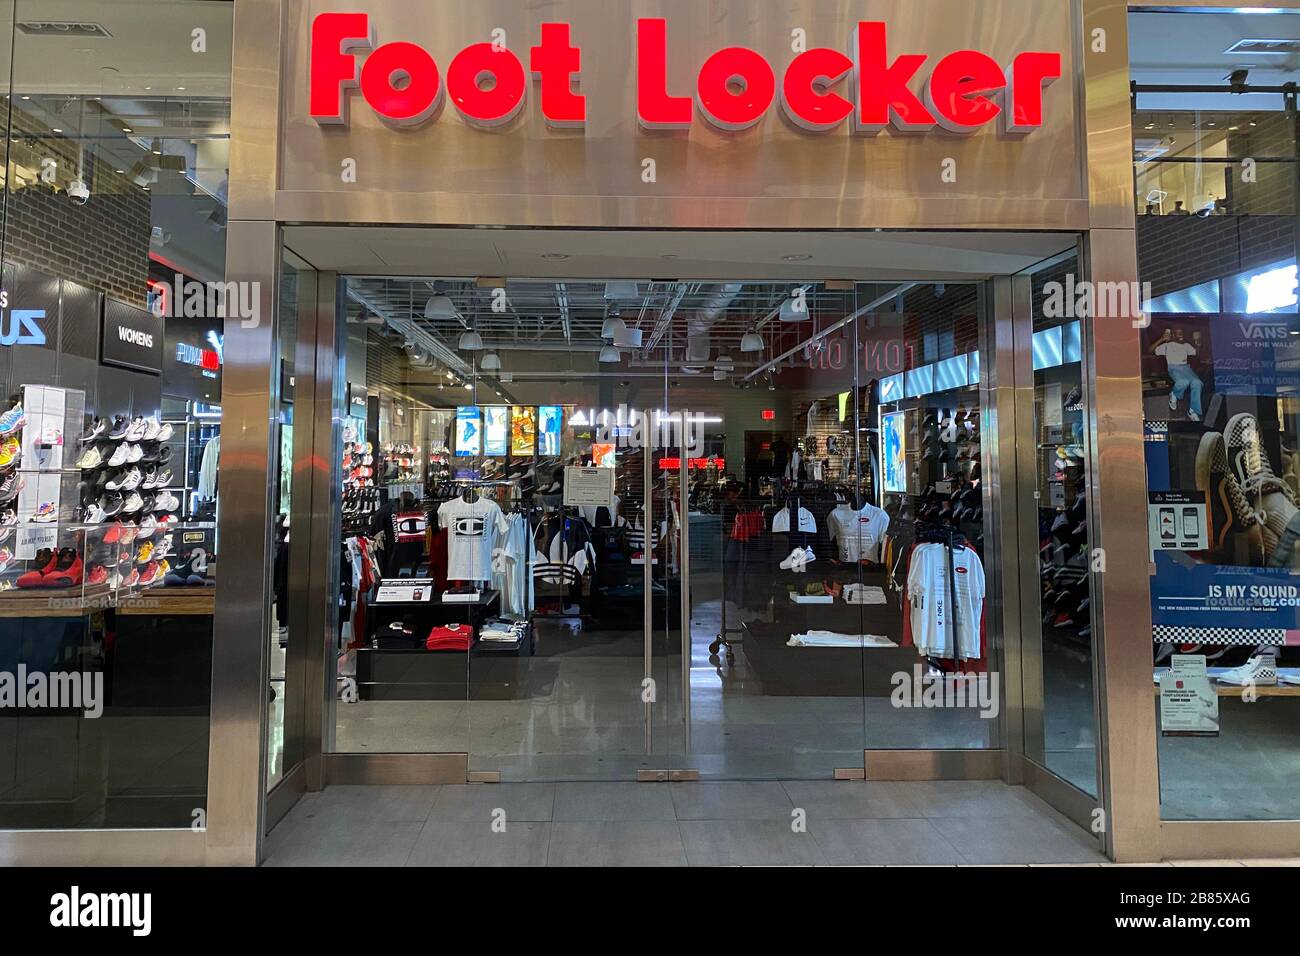 Foot Locker closing more than 400 stores in shopping malls